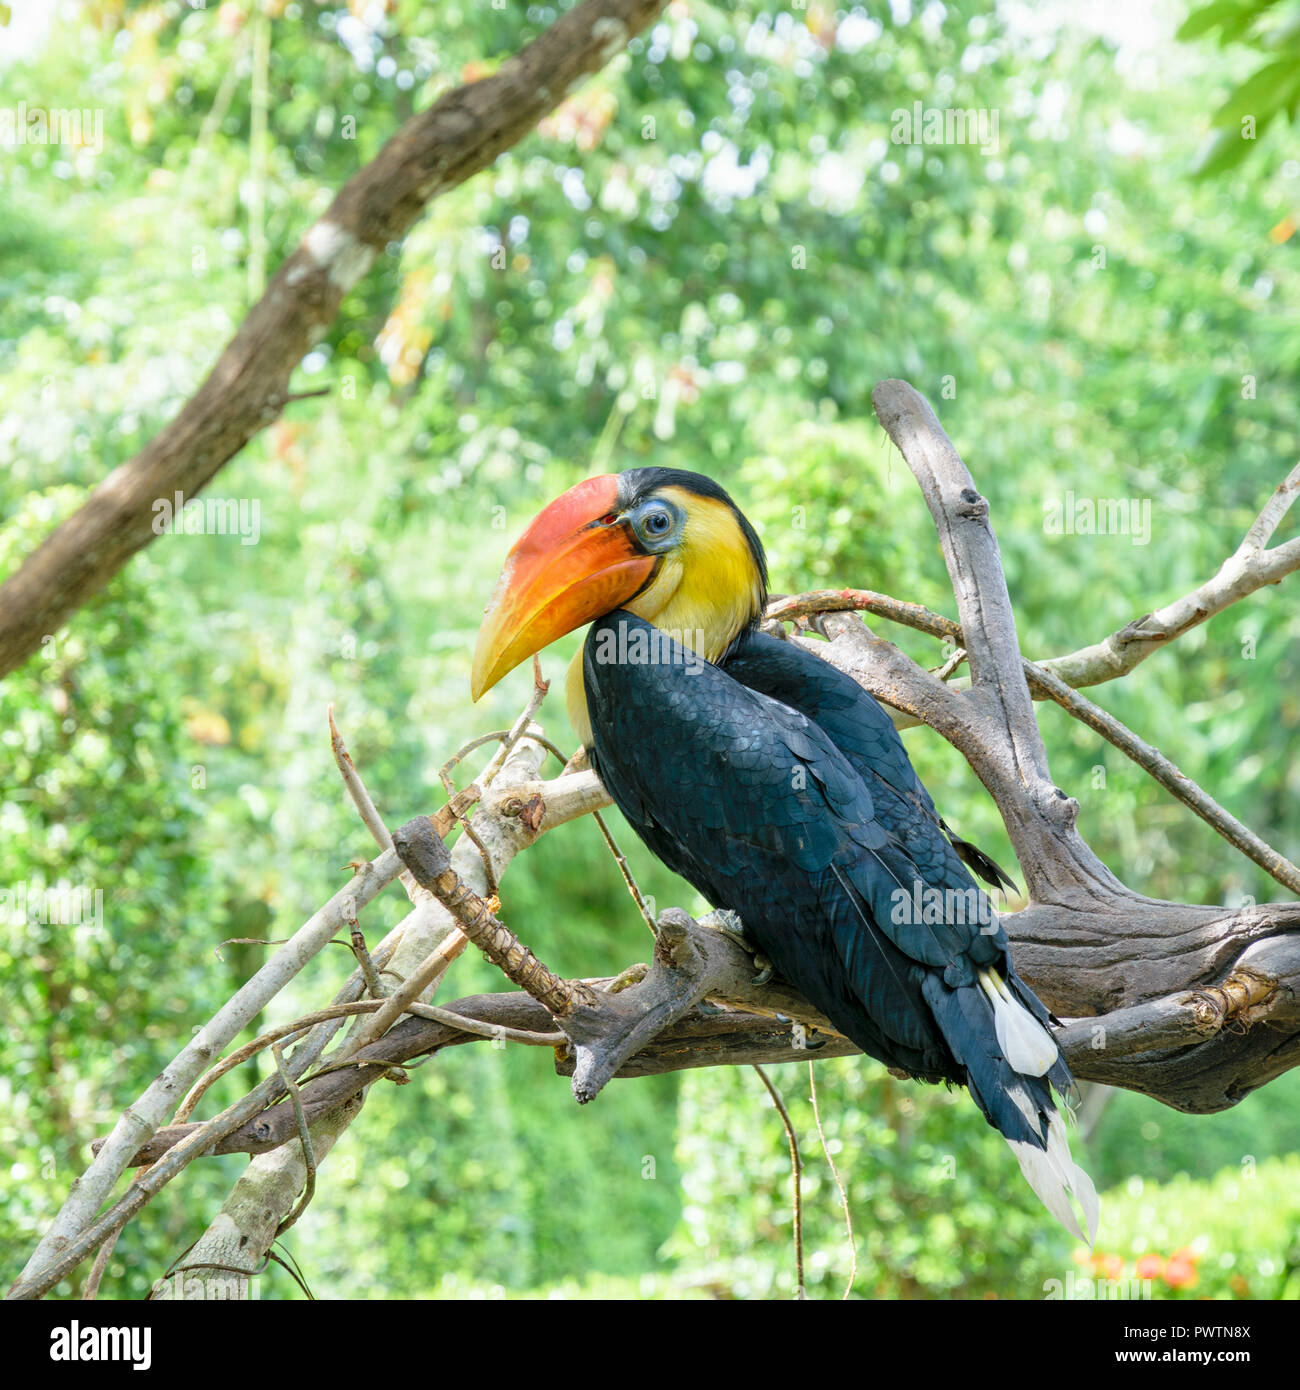 Wrinkled Hornbill, Sunda Wrinkled Hornbill or Aceros Corrugatus. It is a large bird with black feathers and the neck is bright yellow, red casque on t Stock Photo